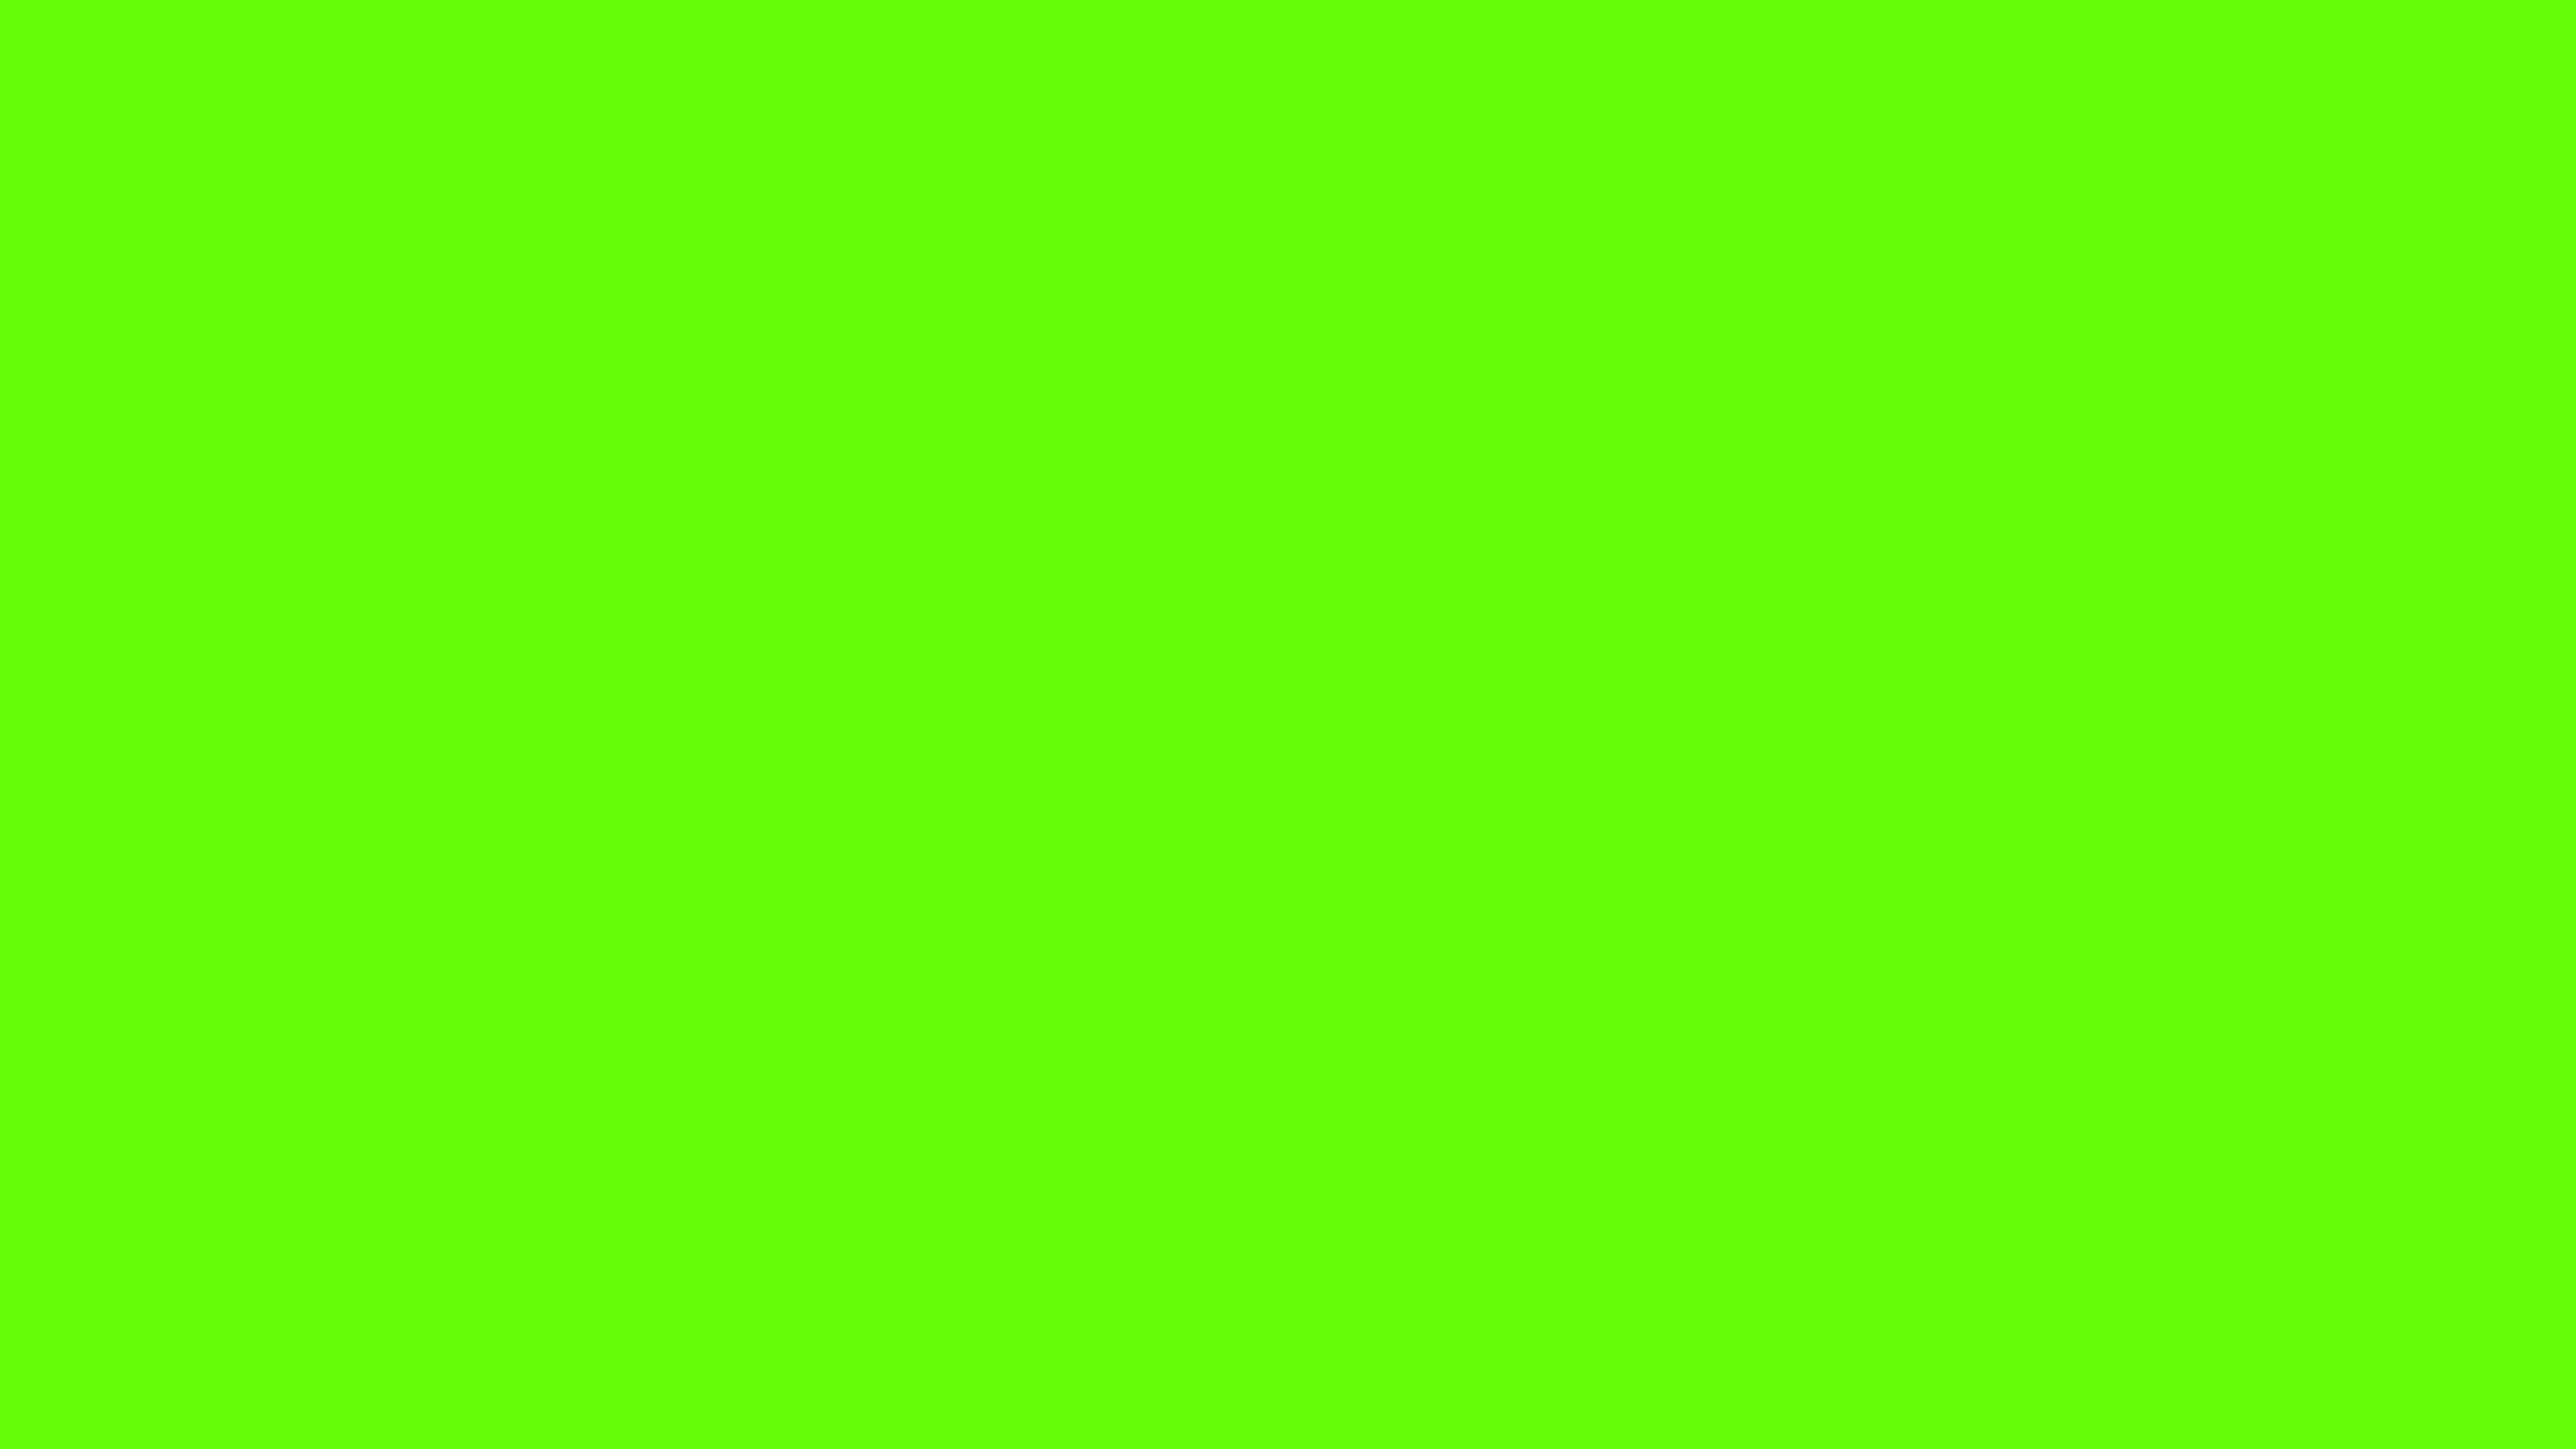 Bright Lime Green Solid Color Background Image | Free Image Generator